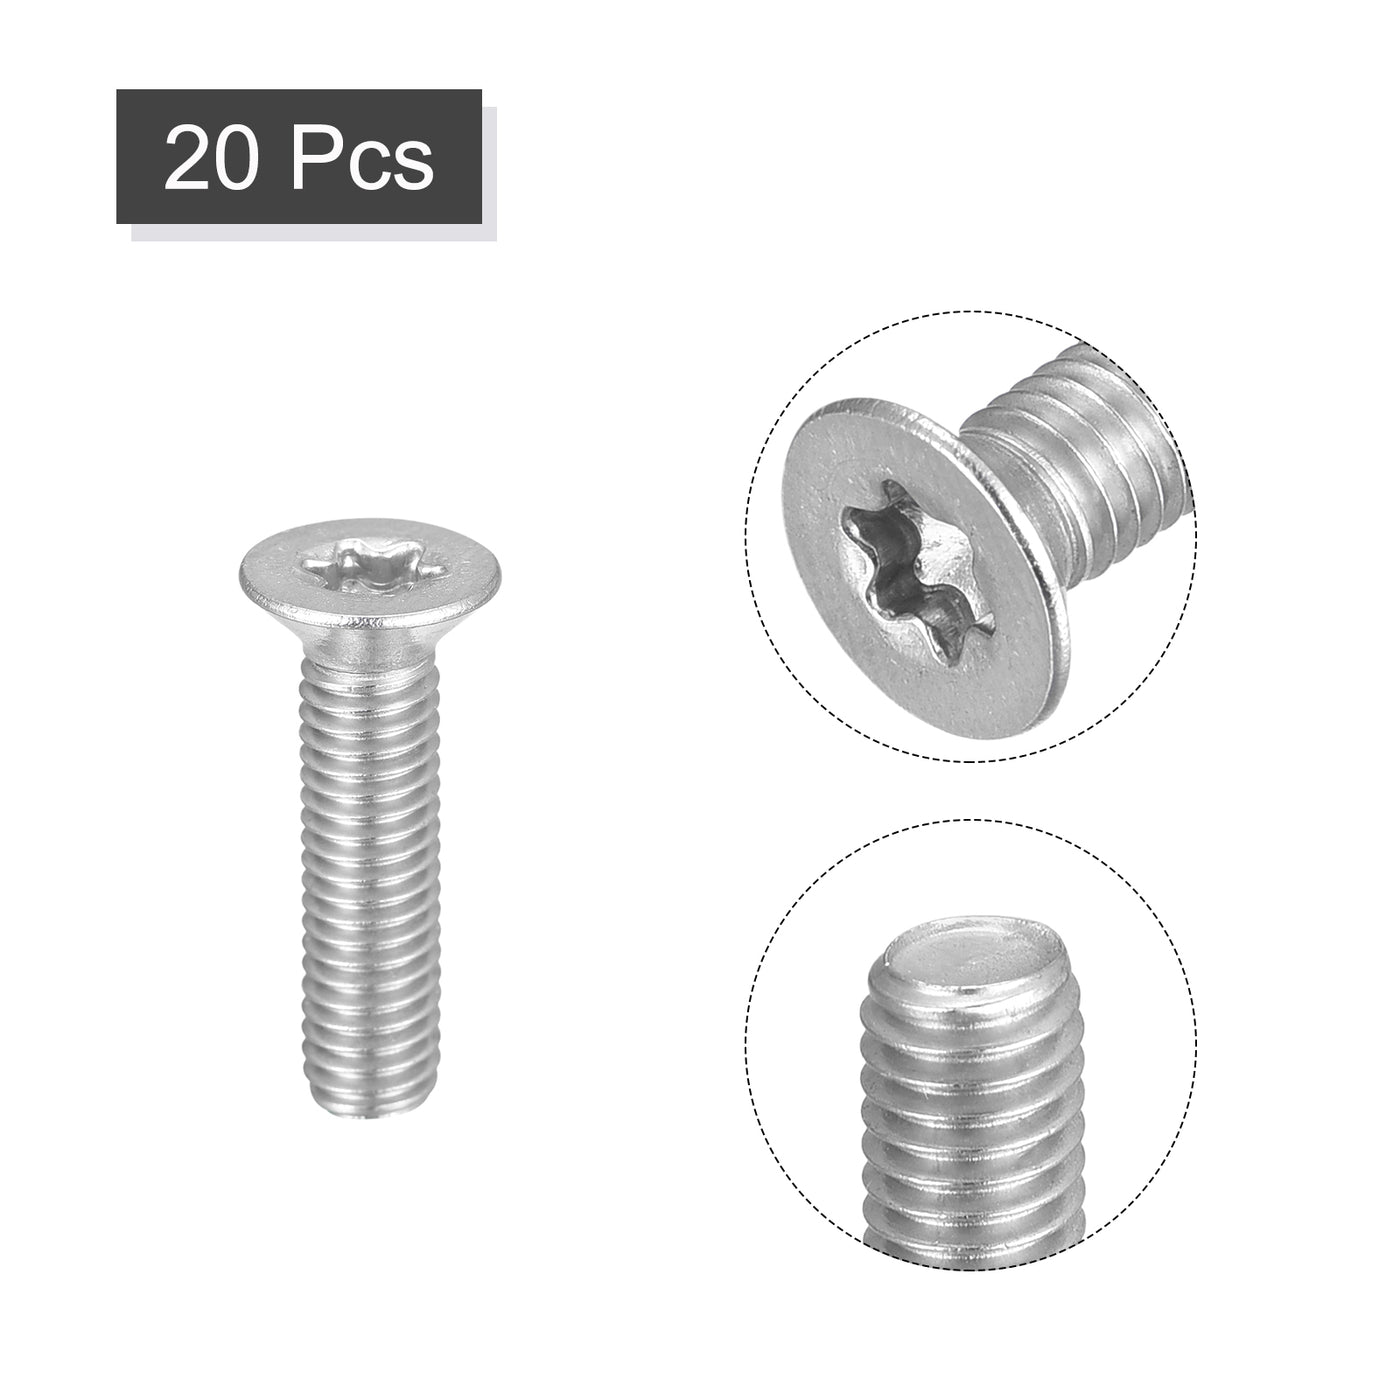 uxcell Uxcell M5x20mm Torx Security Screws, 20pcs 316 Stainless Steel Countersunk Head Screw